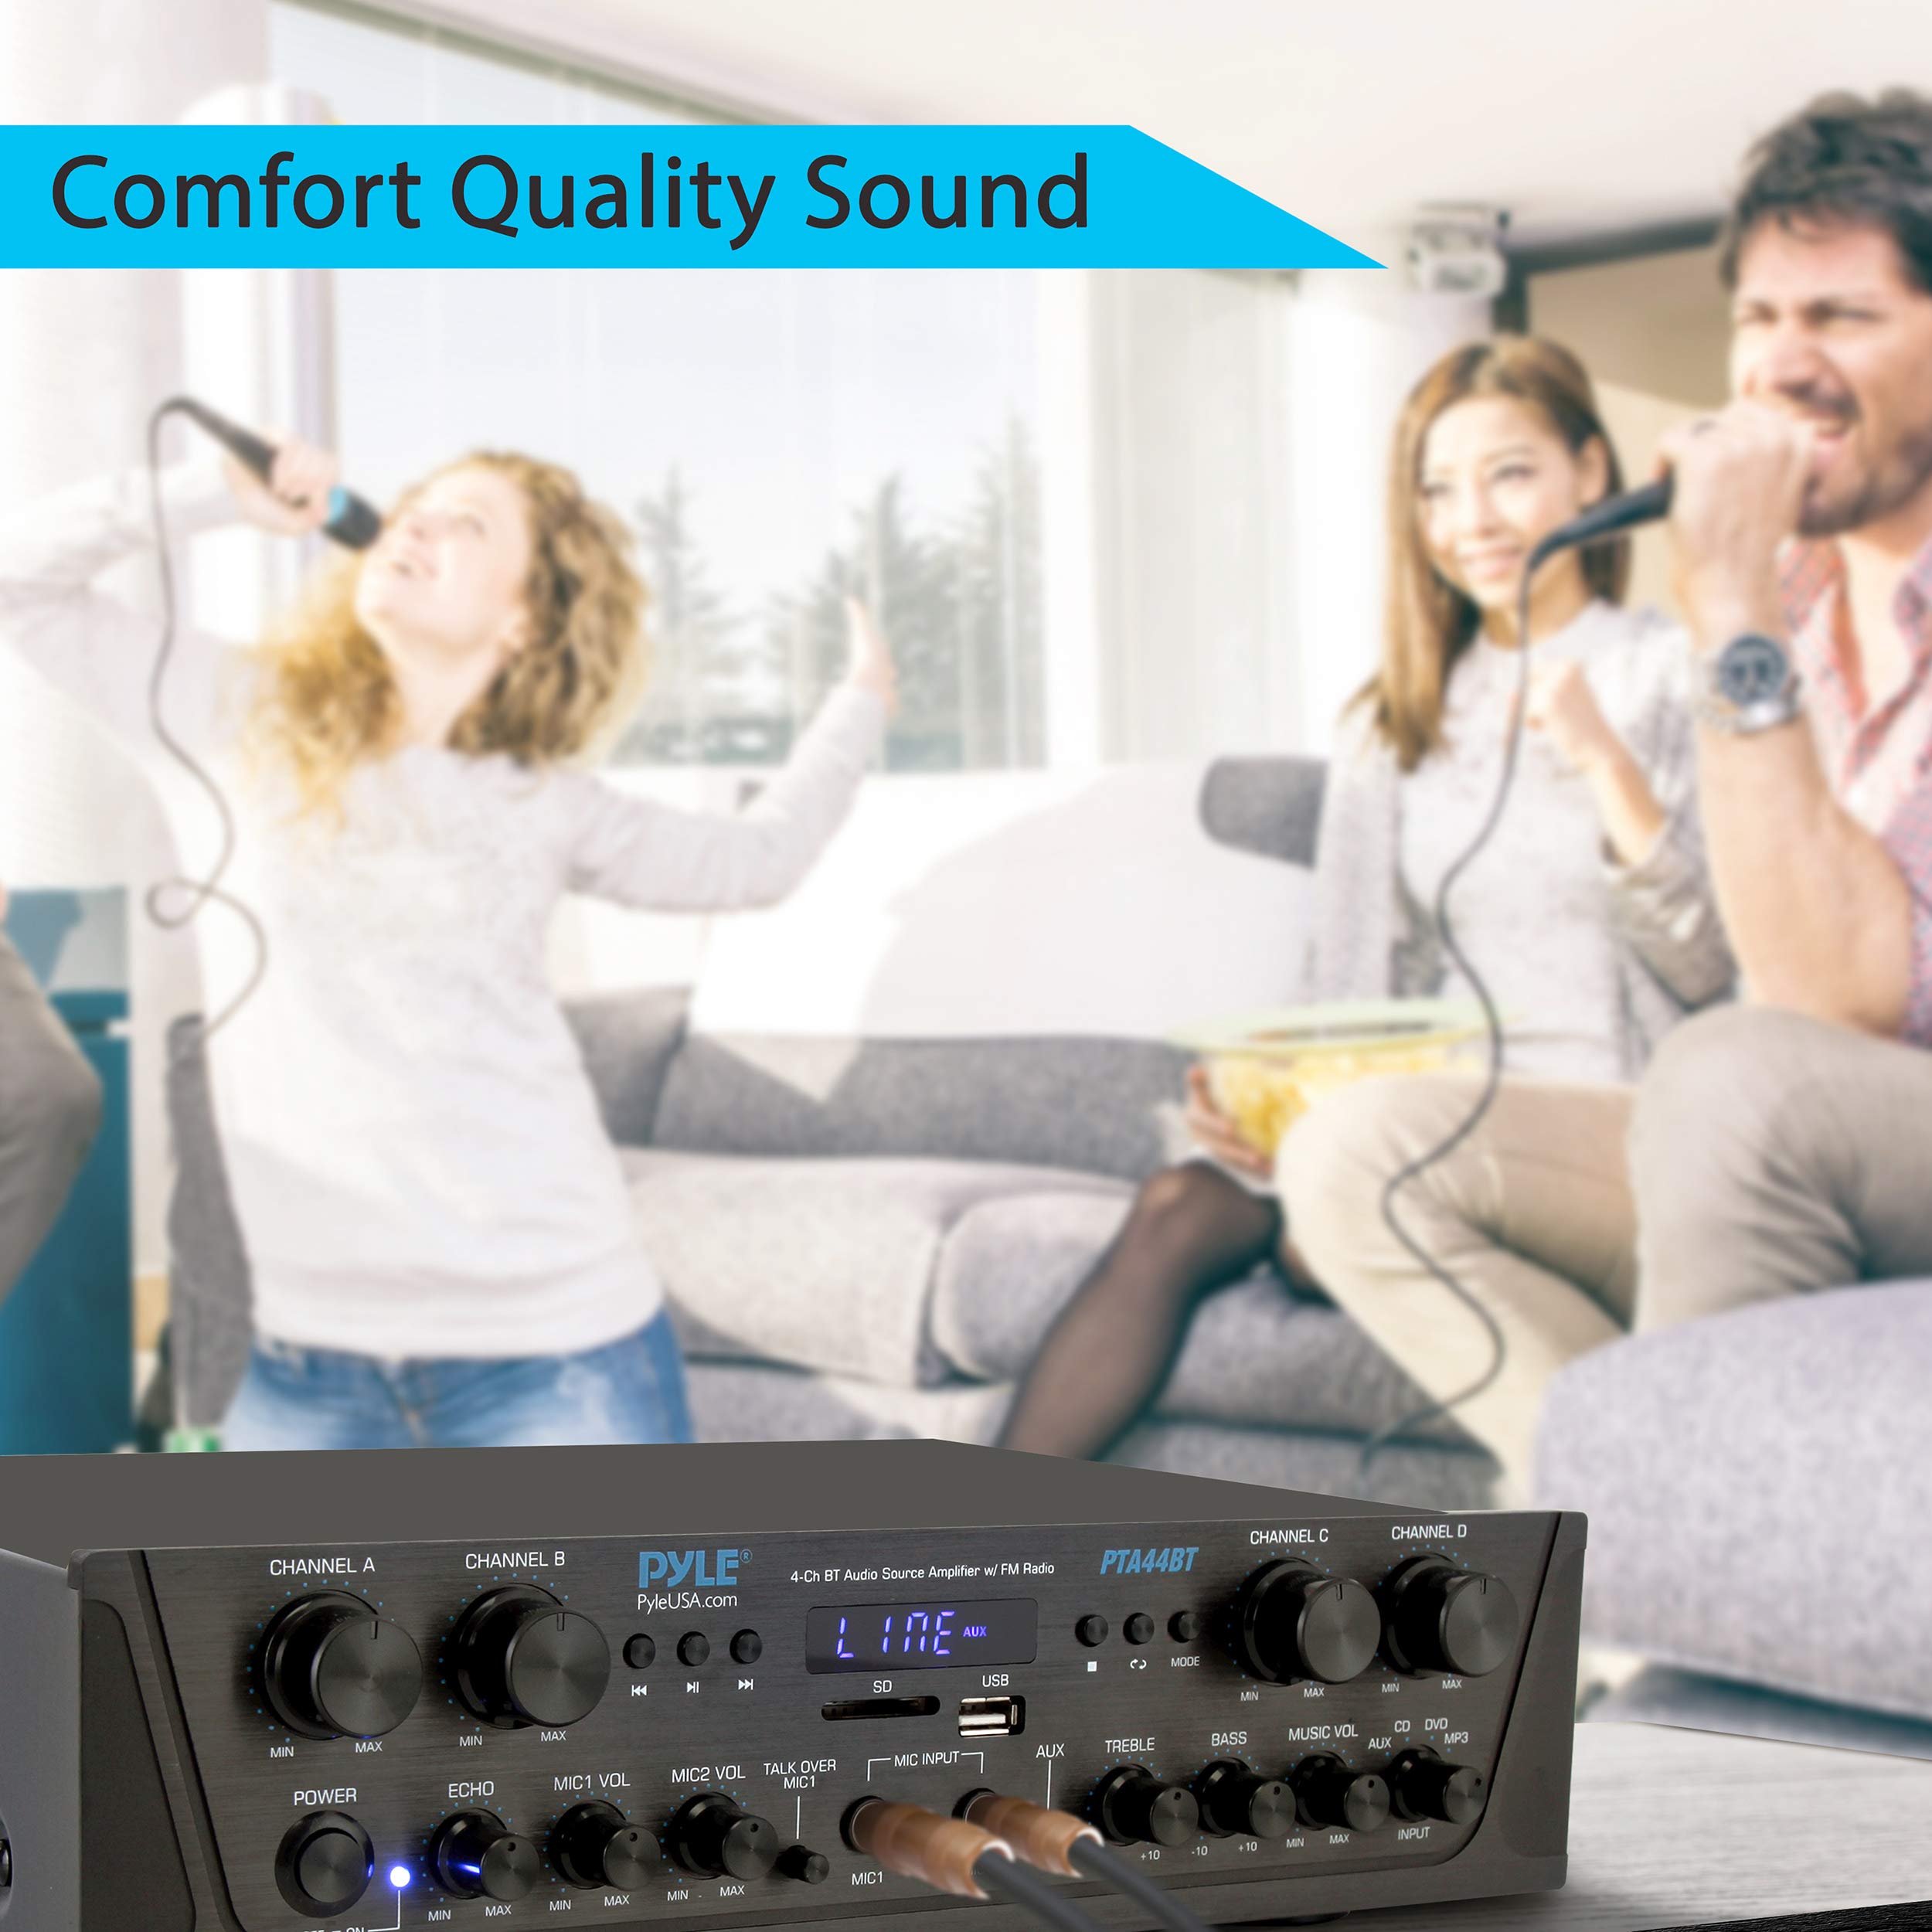 Pyle 500W Karaoke Wireless Bluetooth Amplifier - 4 Channel Stereo Audio Home Theater Speaker Sound Power Receiver with AUX IN, FM, RCA Subwoofer Speakers OUT, USB, Microphone IN with Echo - PTA44BT